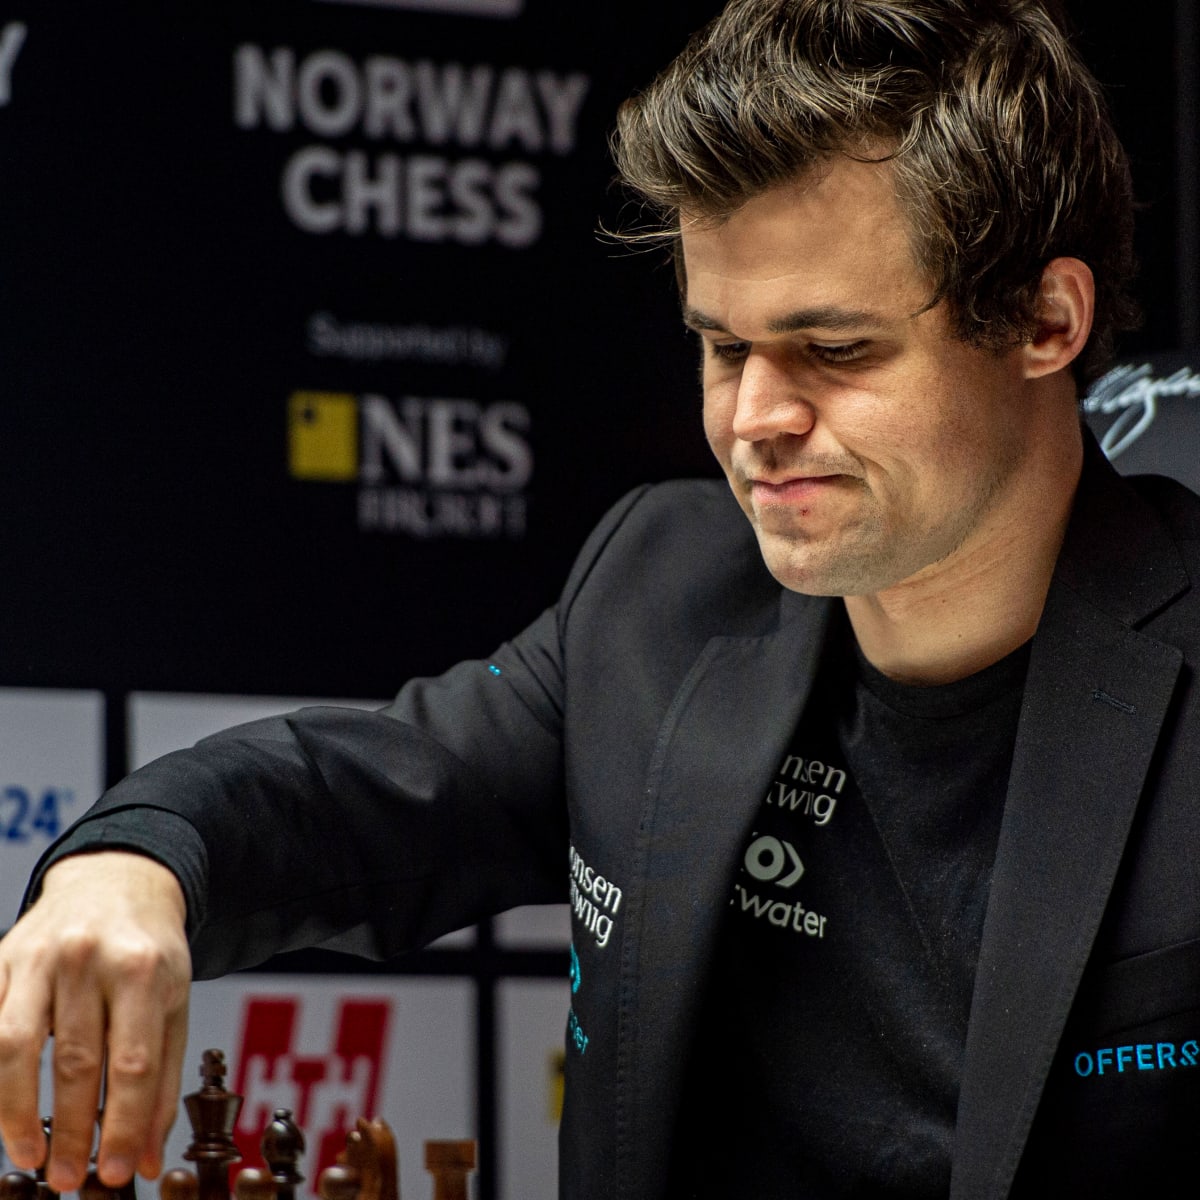 Magnus Carlsen Joins Esports Rich List, a First for a Chess Player